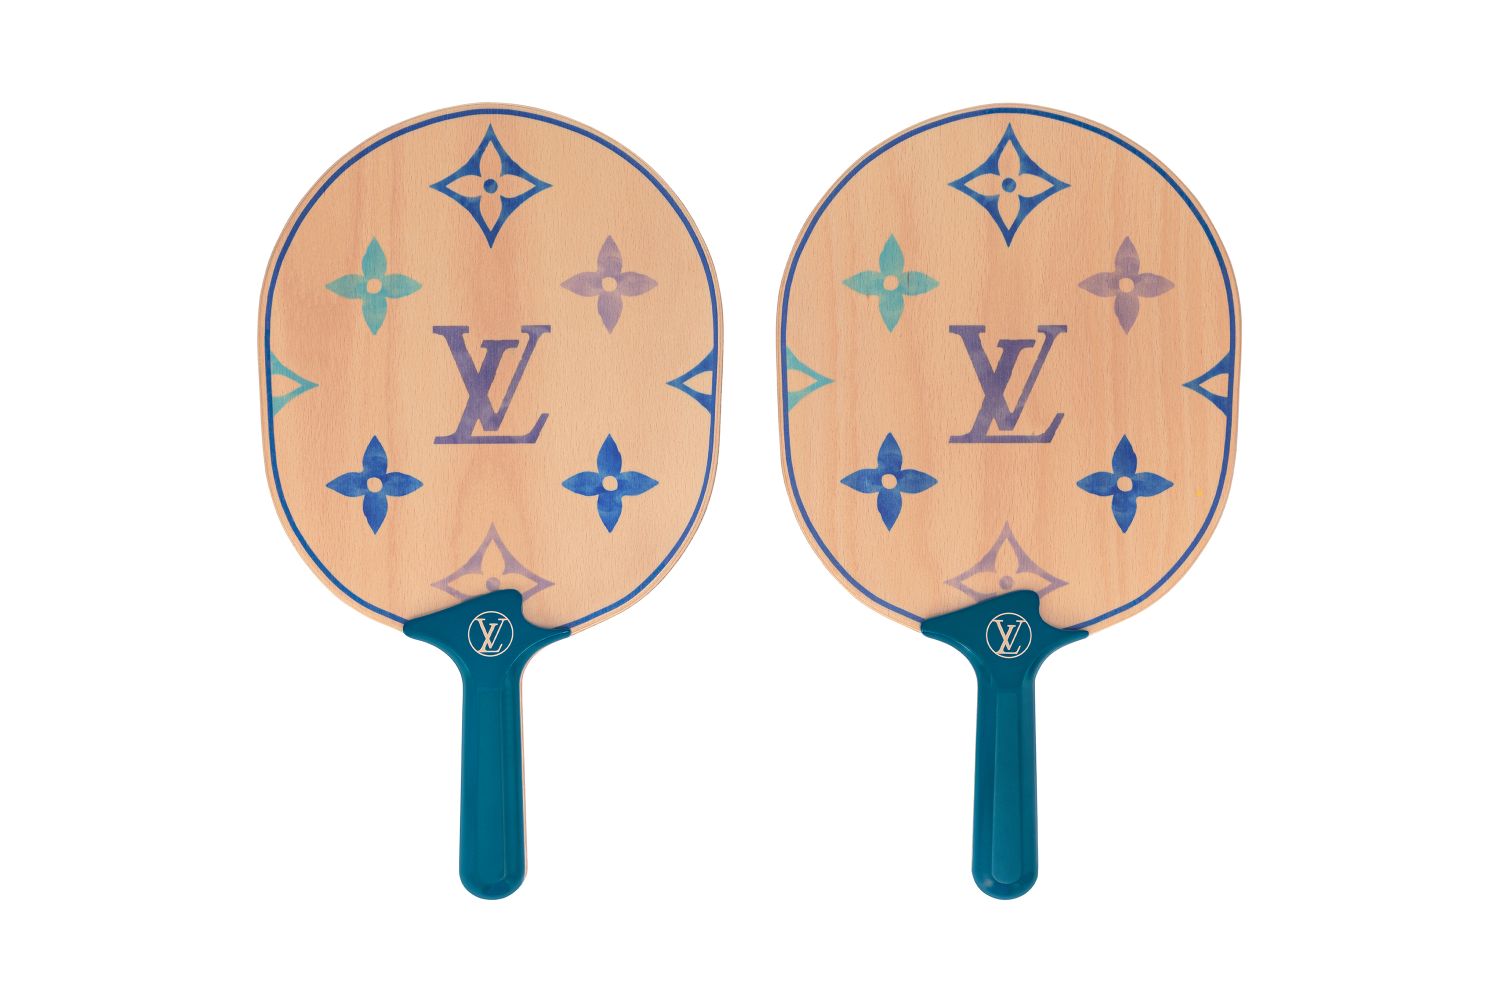 Louis Vuitton's LV By The Pool Has Every Summer Essential - A&E Magazine